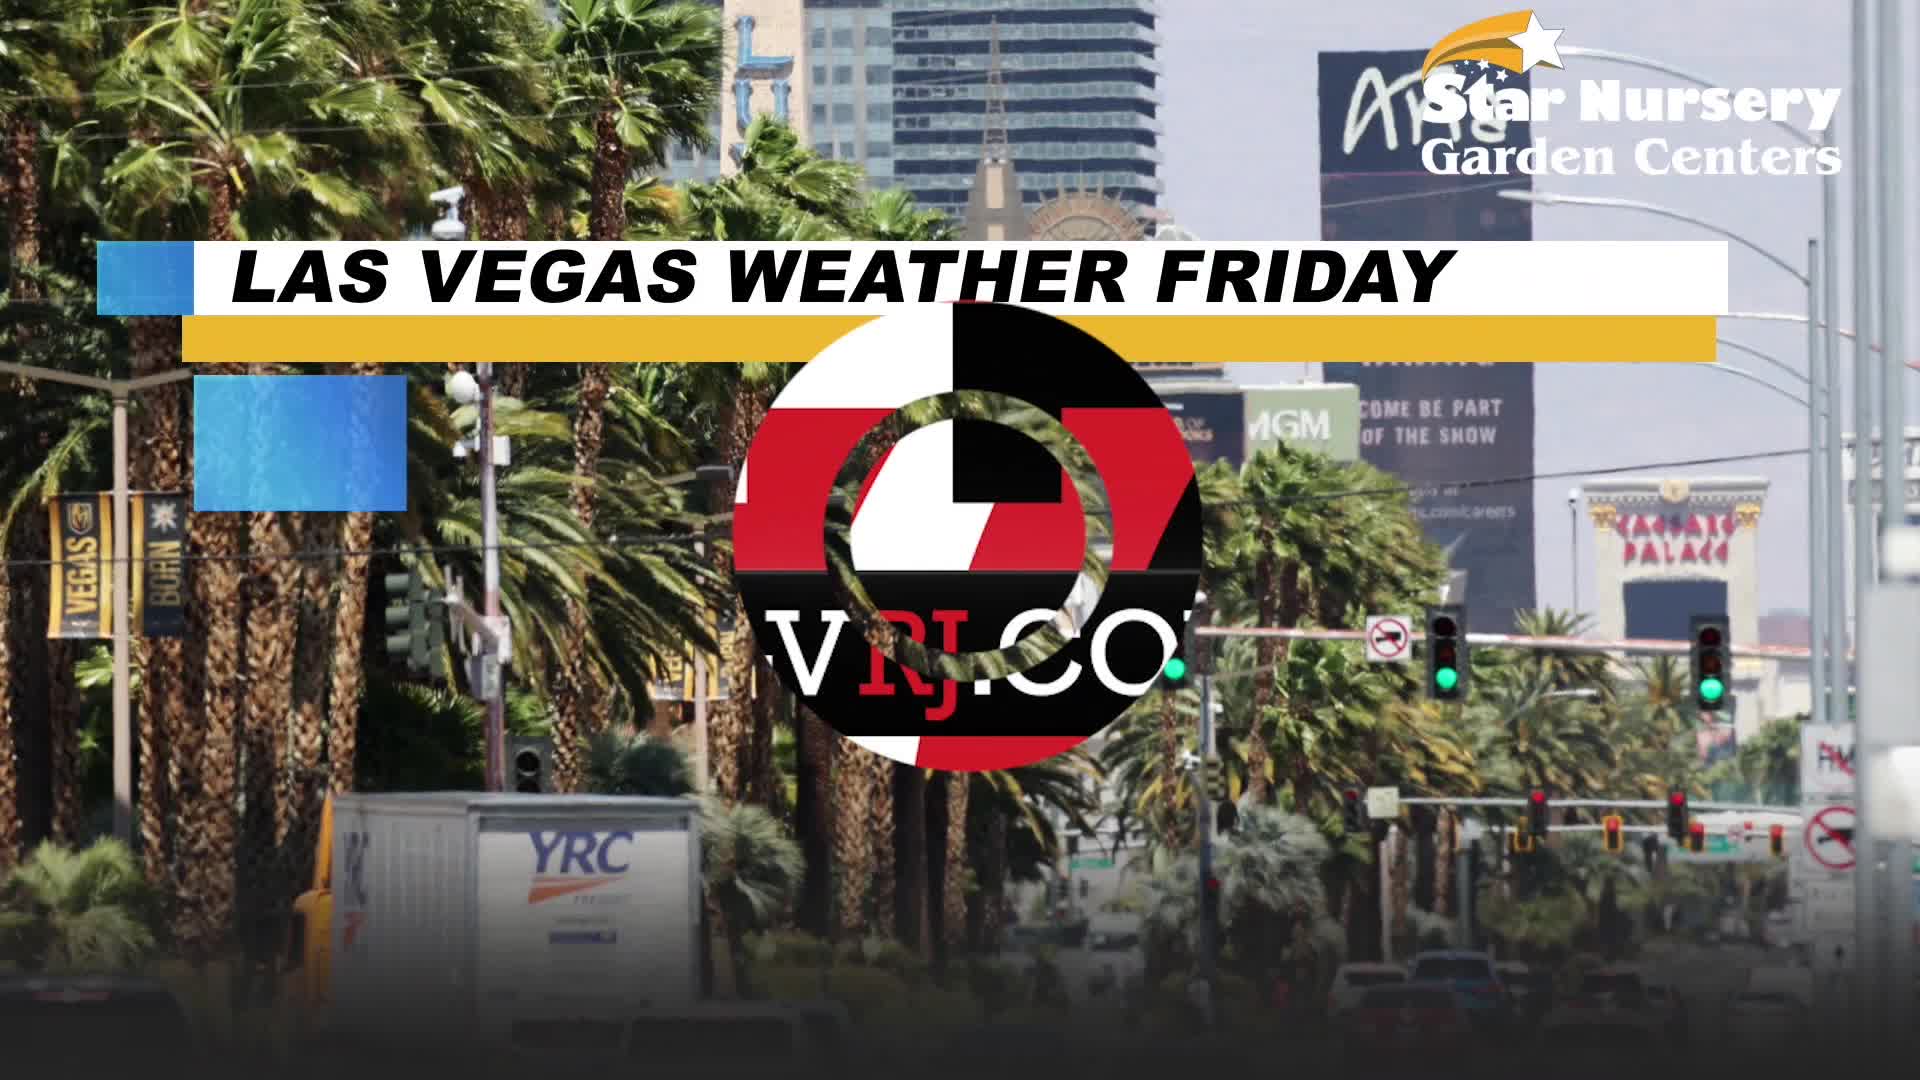 After mostly sunny Friday, Las Vegas rain odds rise for MLK weekend